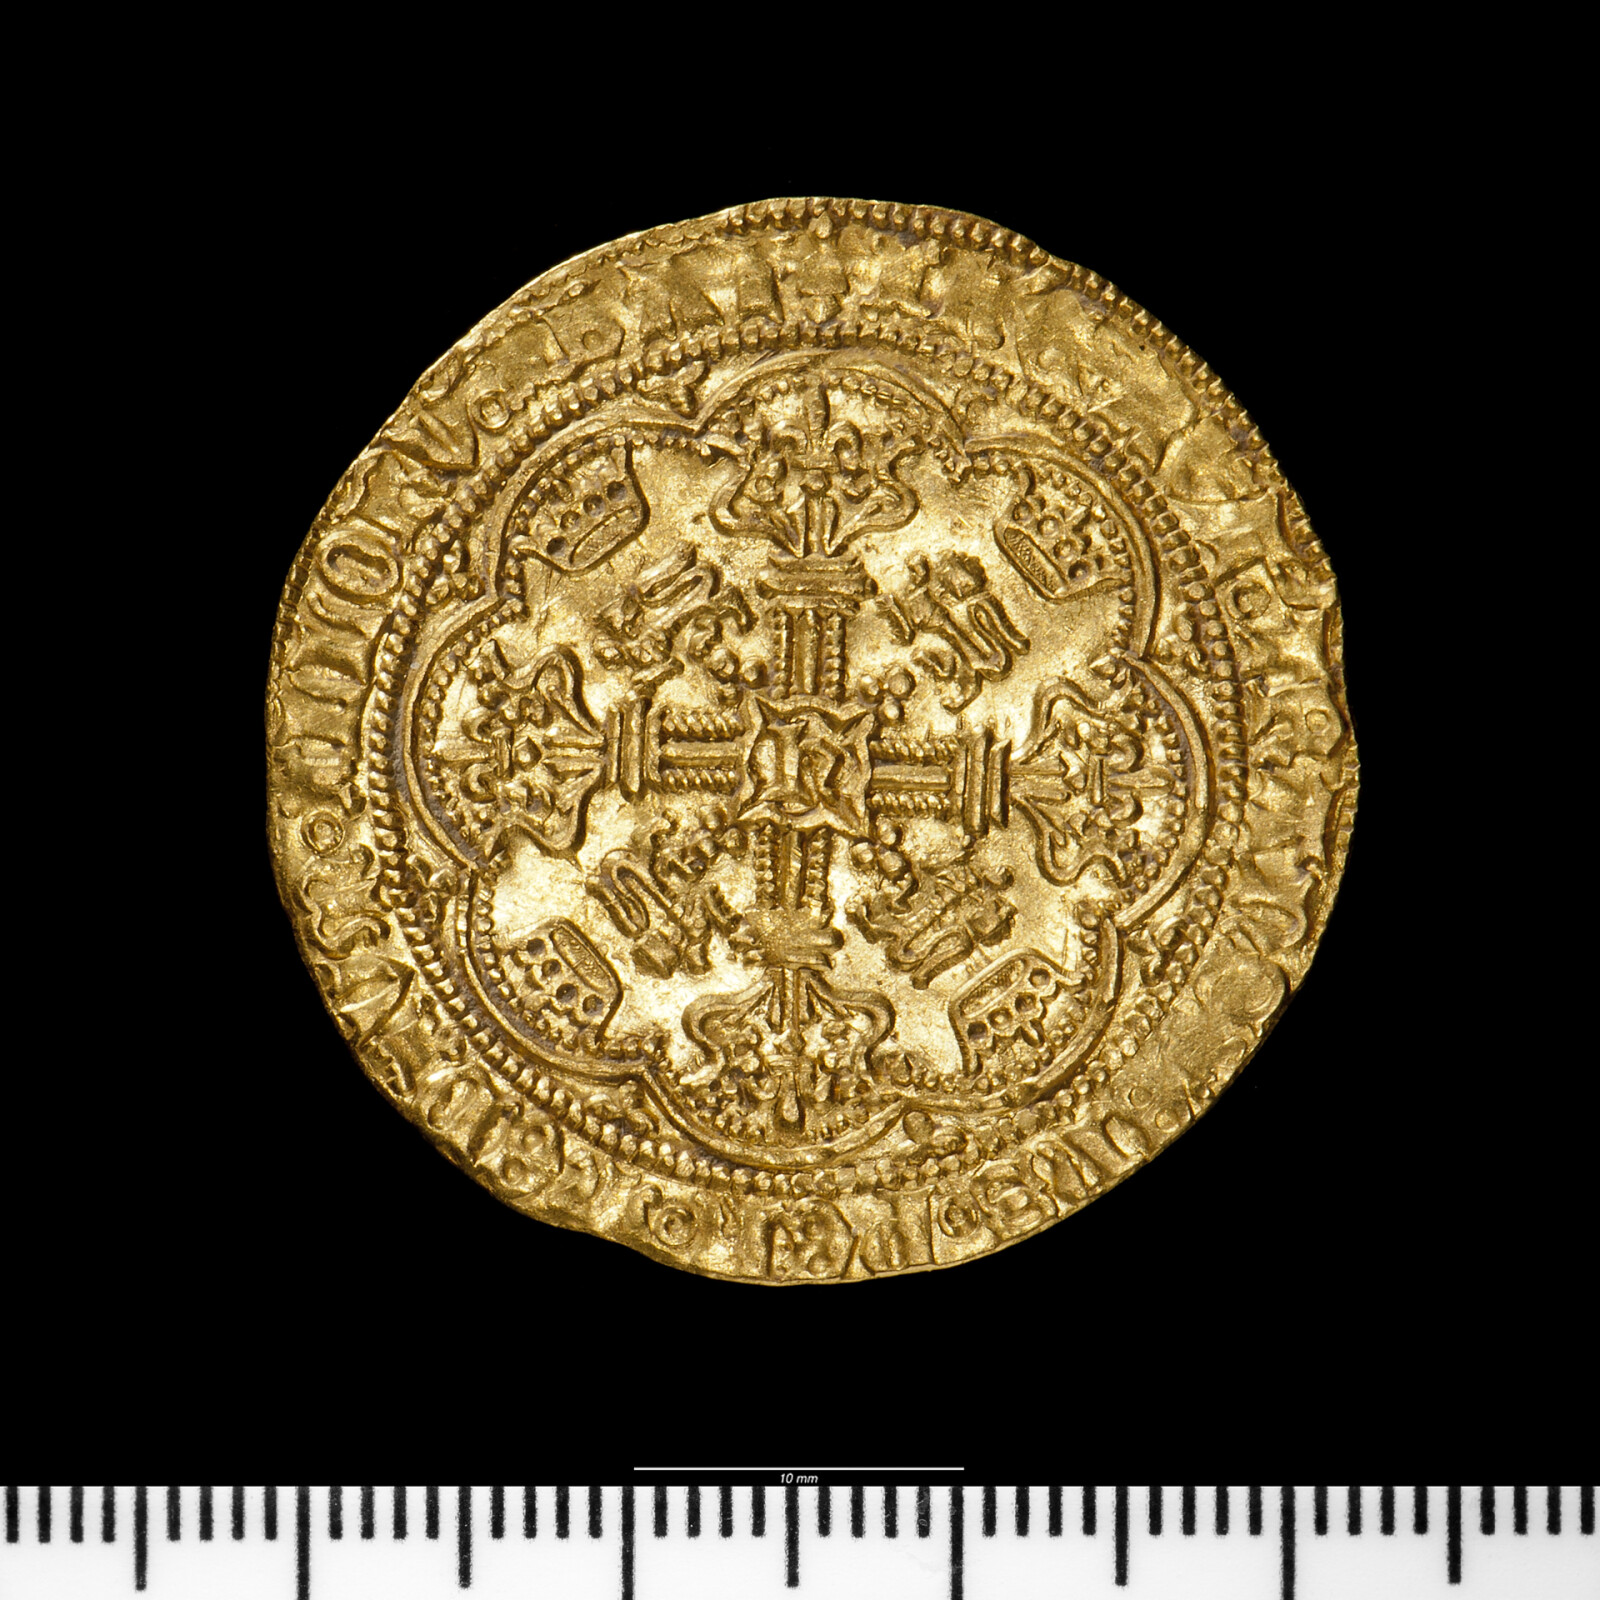 A picture of a medieval gold coin